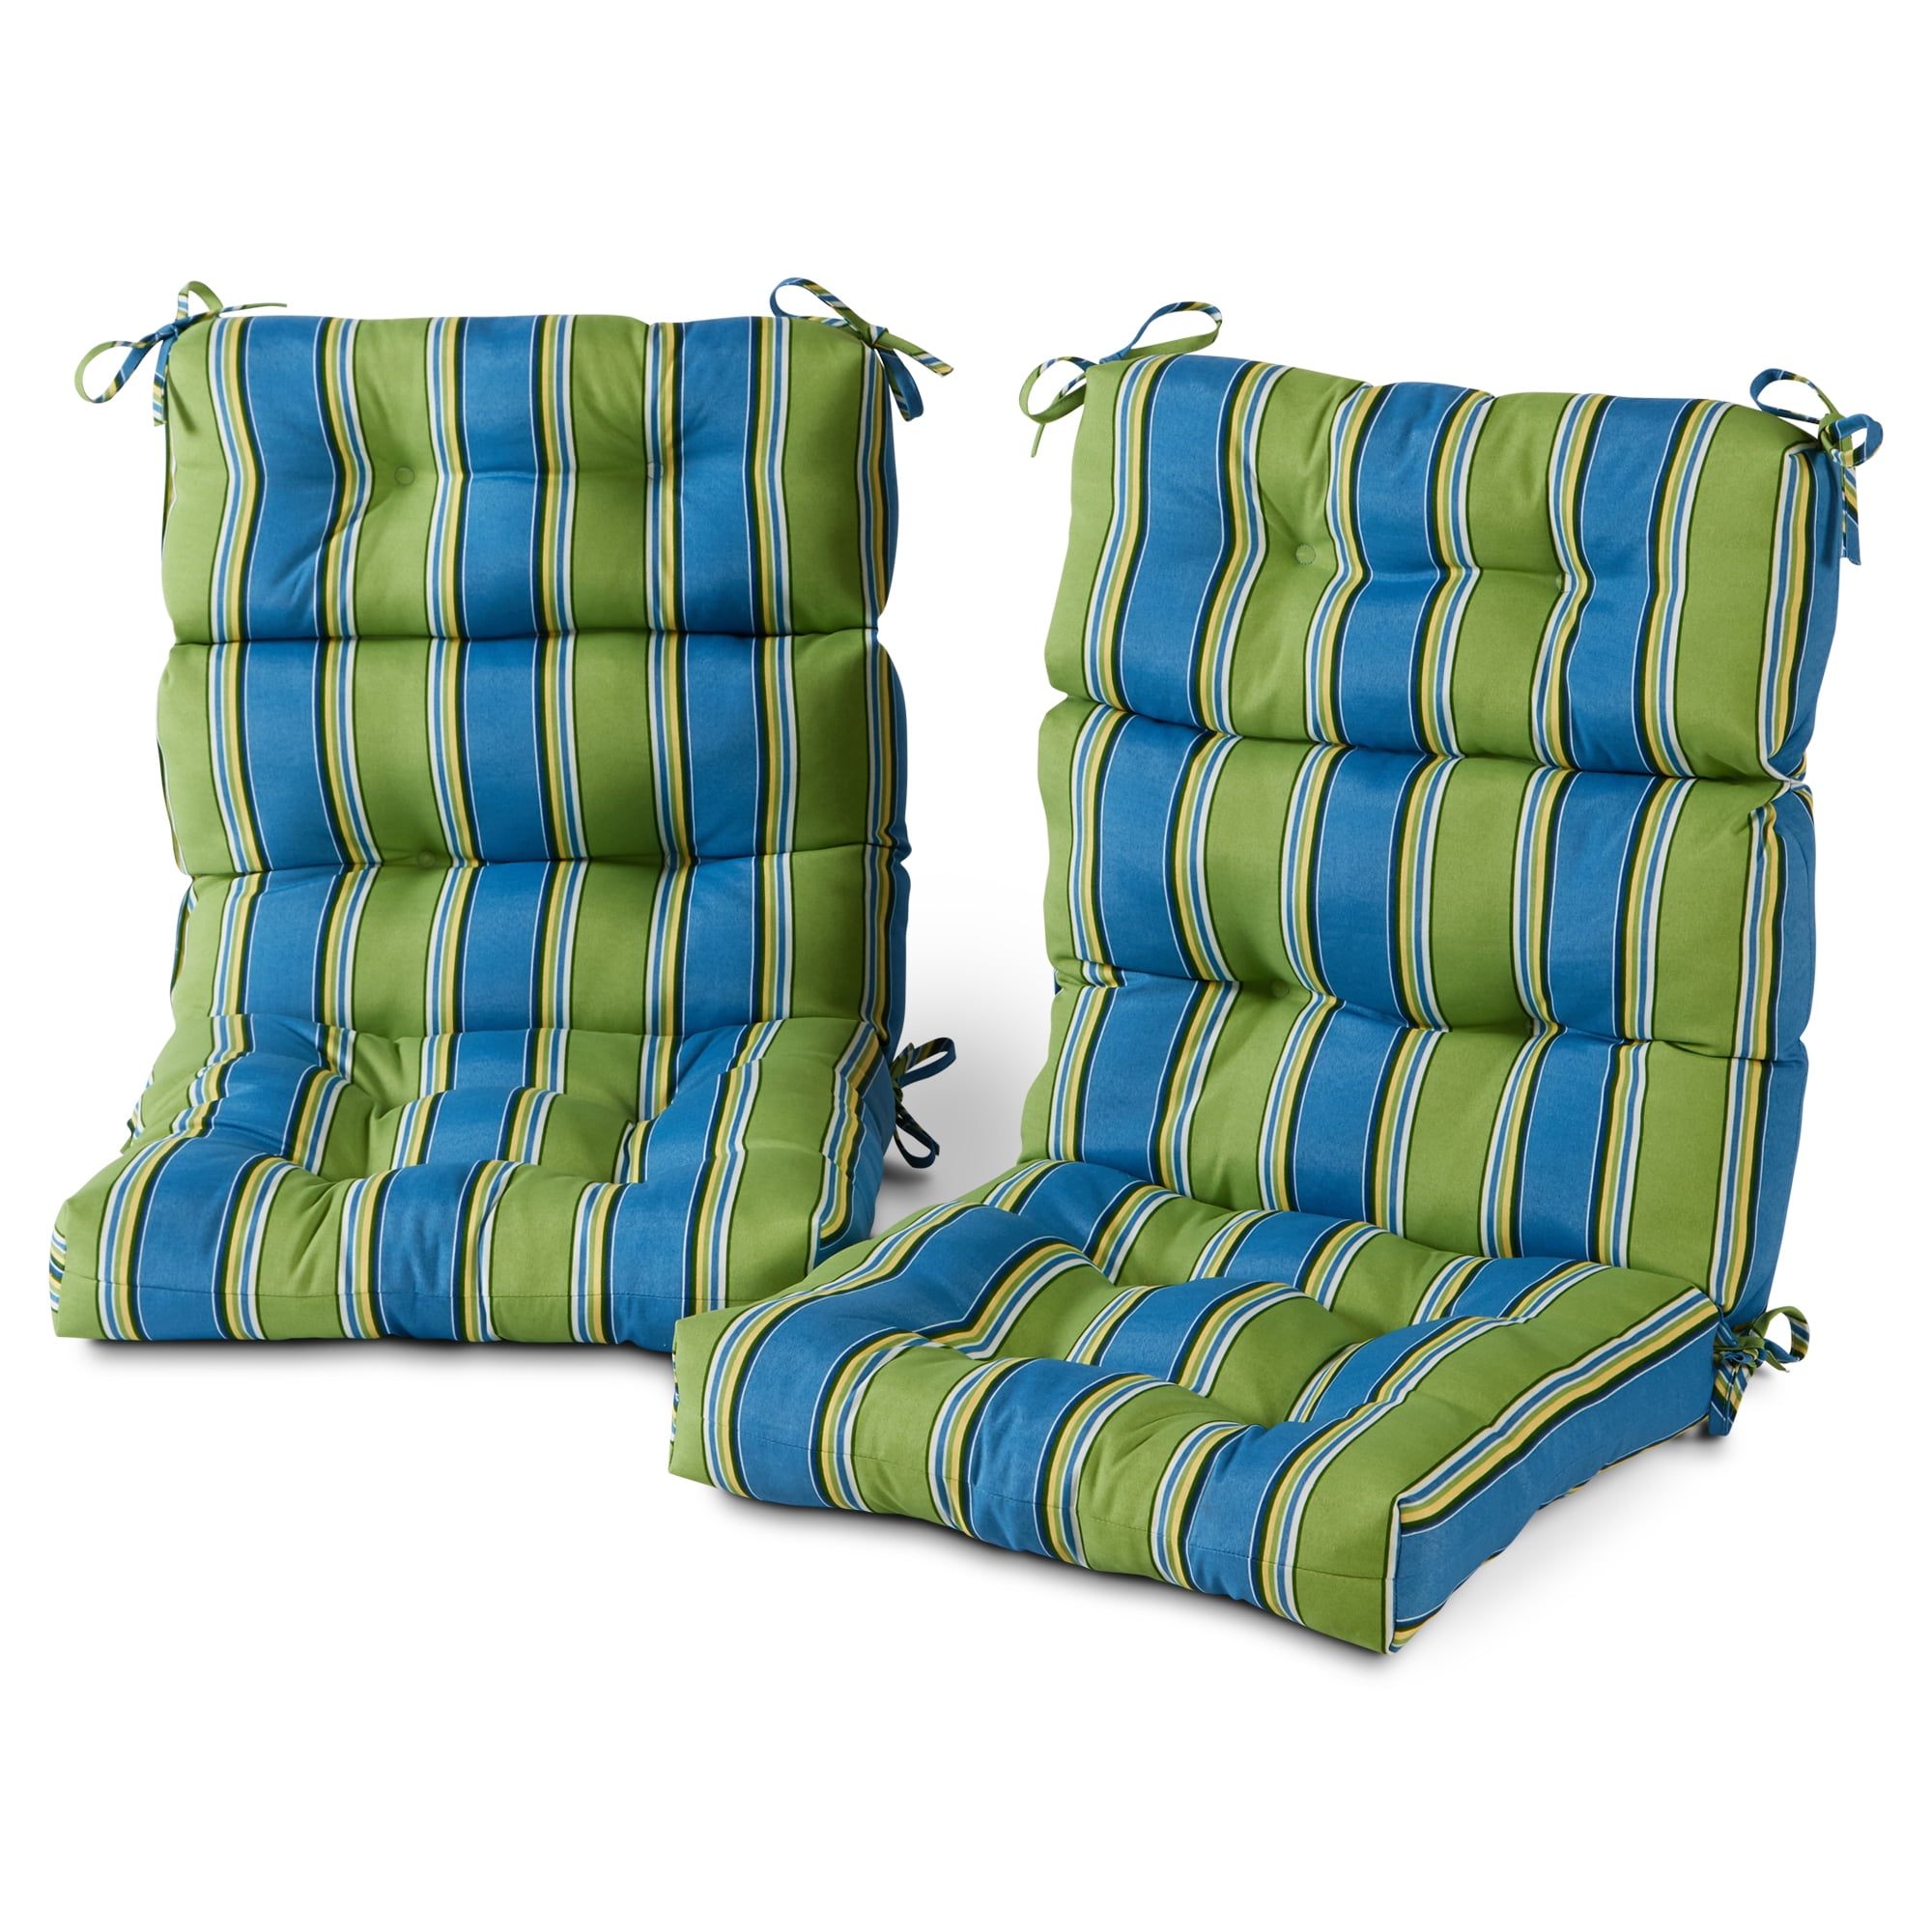 Cayman Stripe 44 x 22 in. Outdoor High Back Chair Cushion, Set of 2